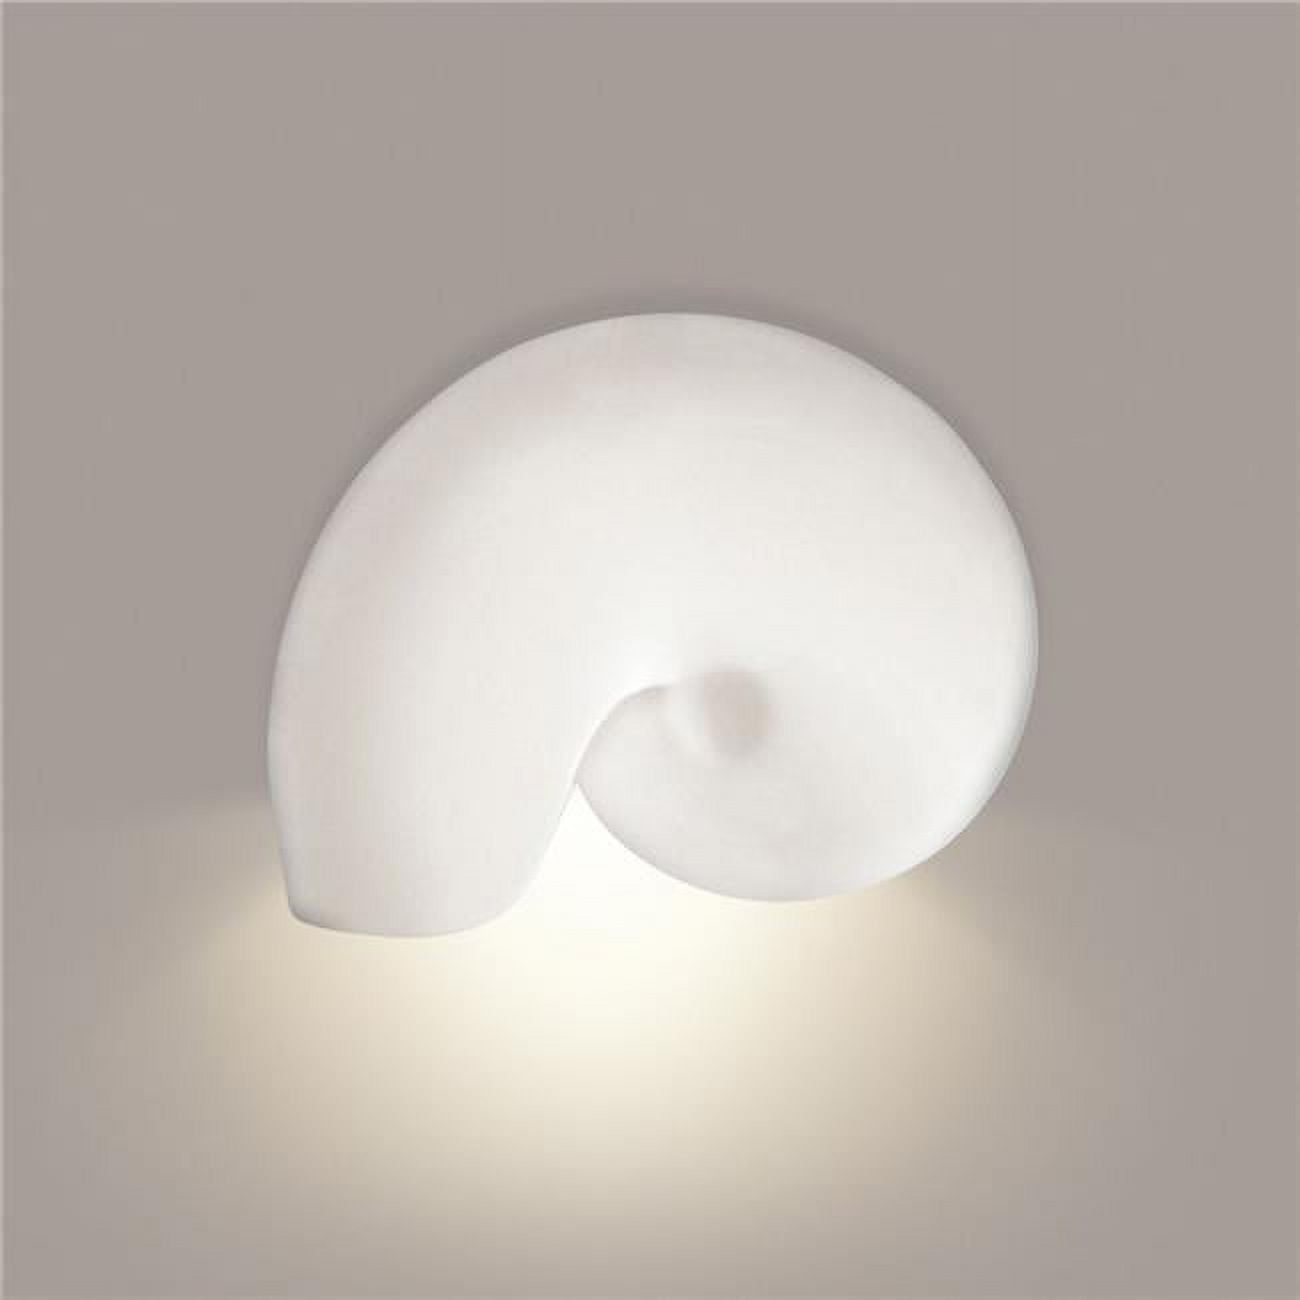 A19 Lighting 1103D-1LEDE26 Nautilus Downlight E26 Base Dimmable LED Wall Sconce